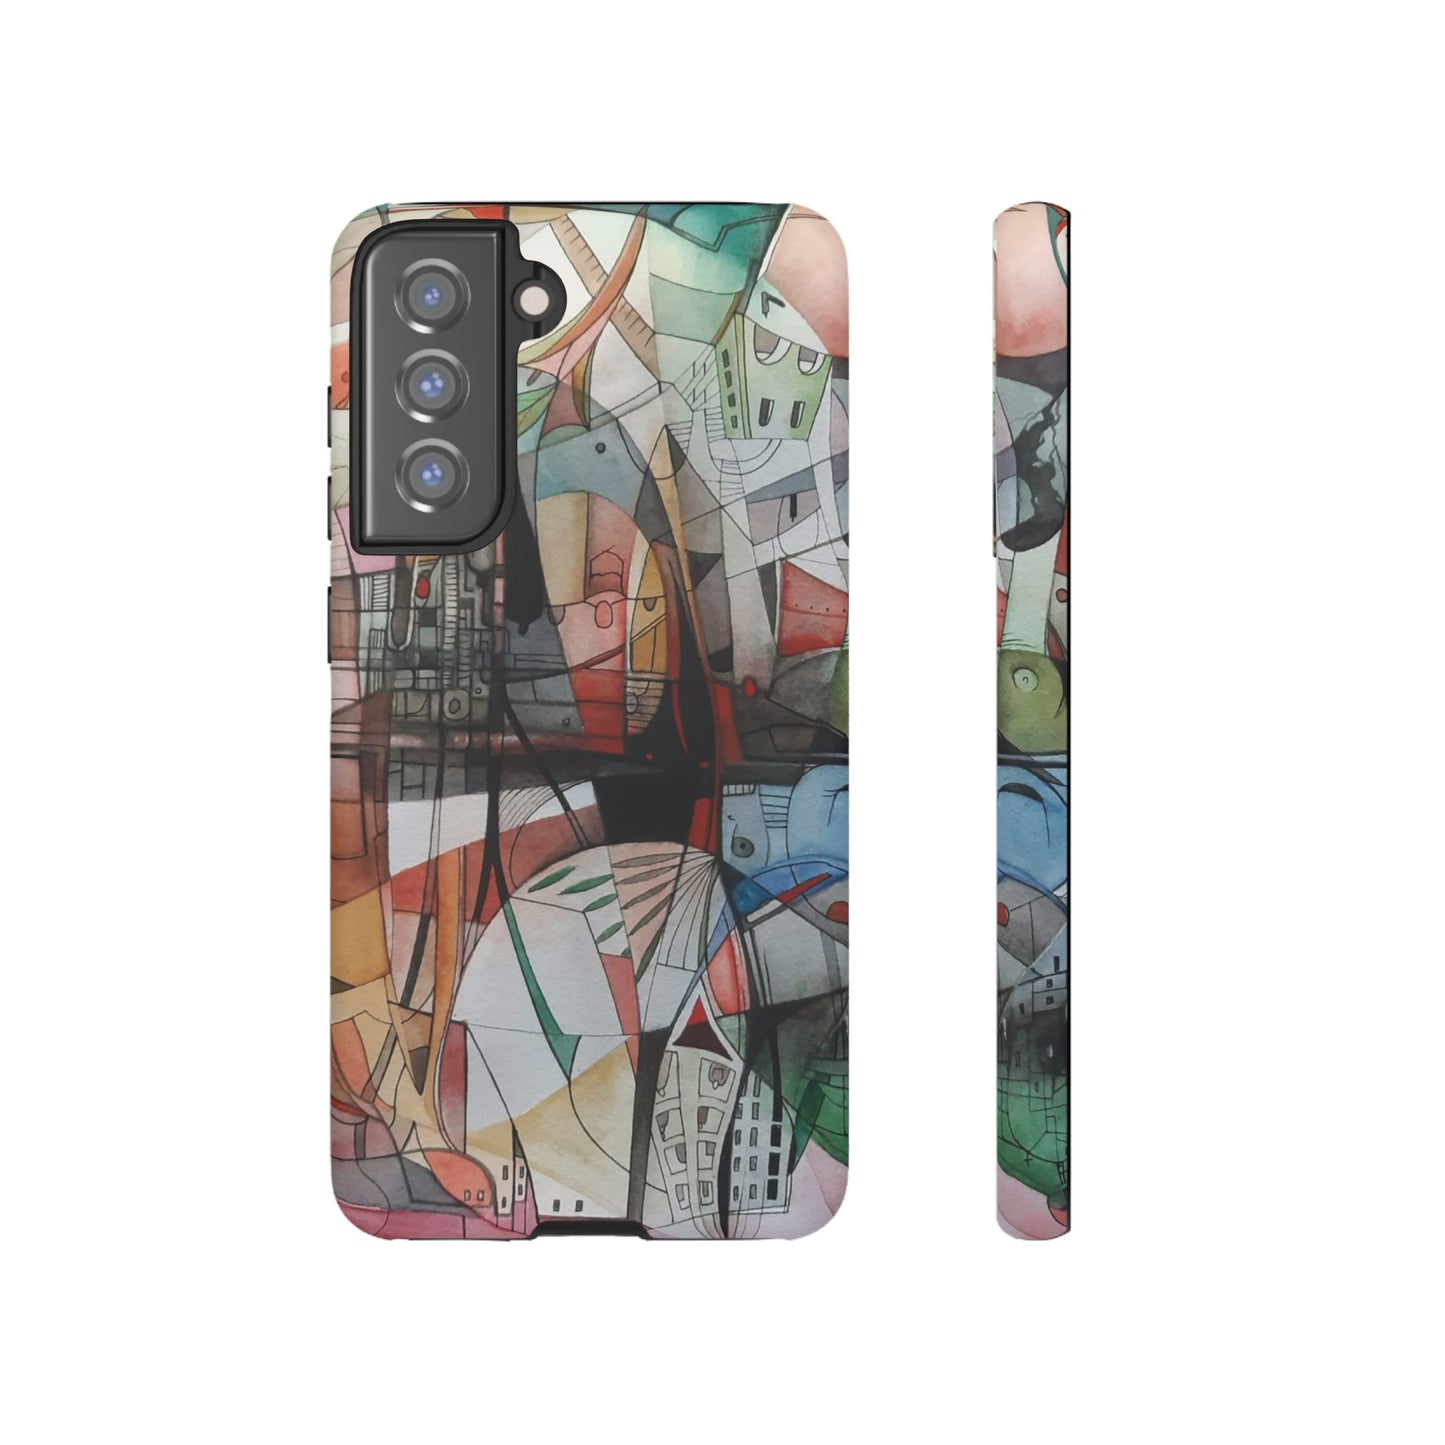 California Art Work - All IPhone and Samsung Tough Cases